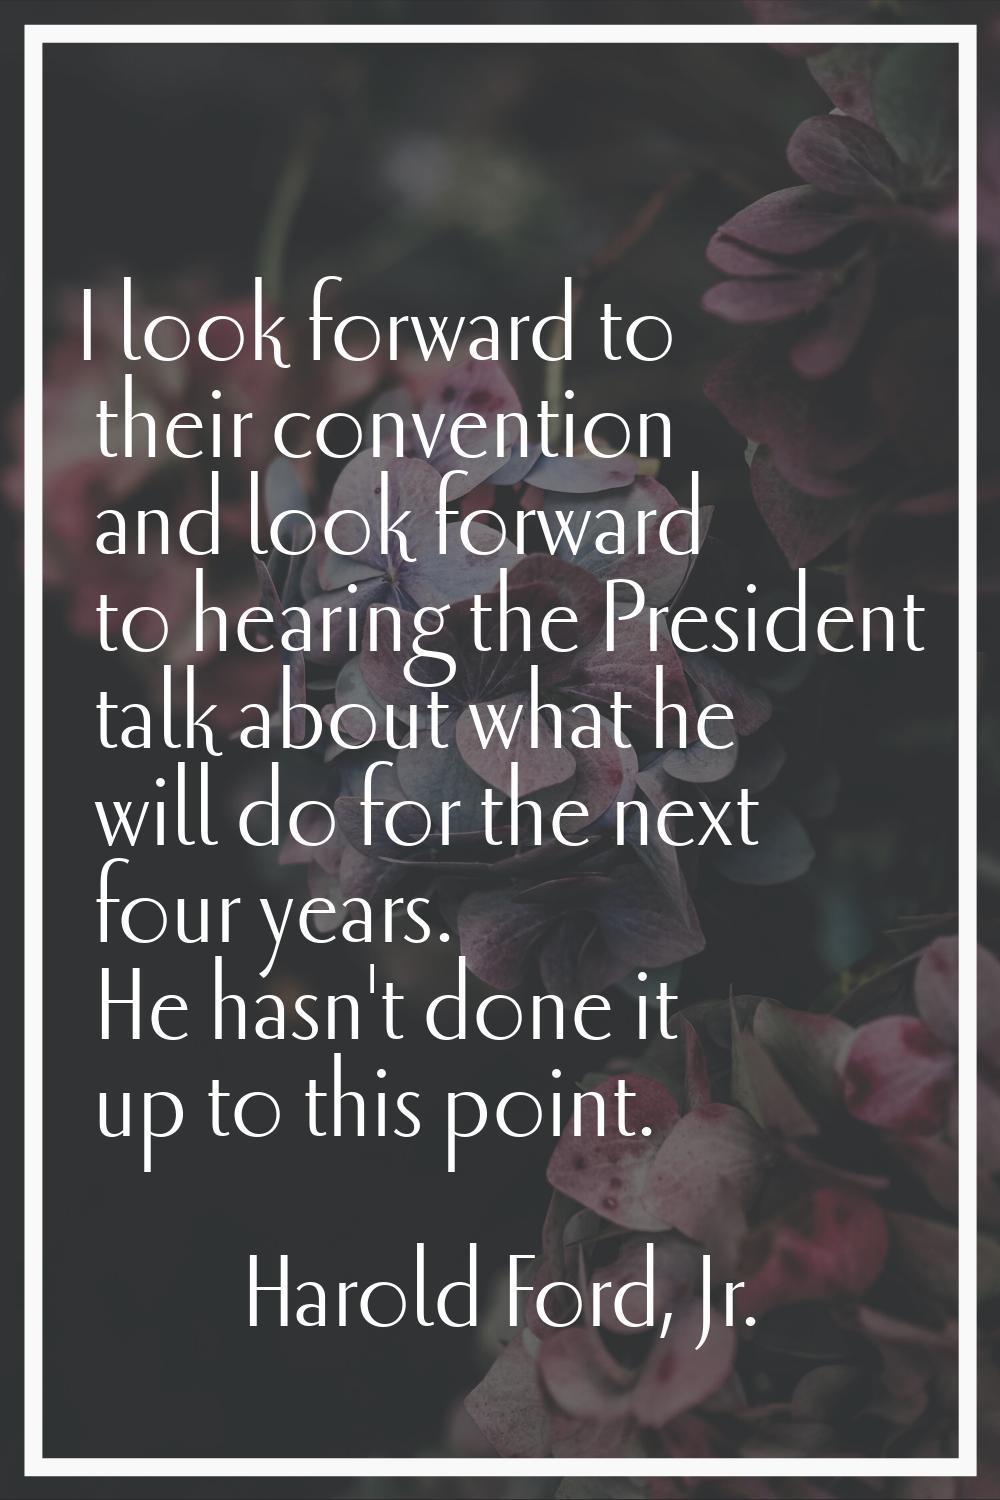 I look forward to their convention and look forward to hearing the President talk about what he wil